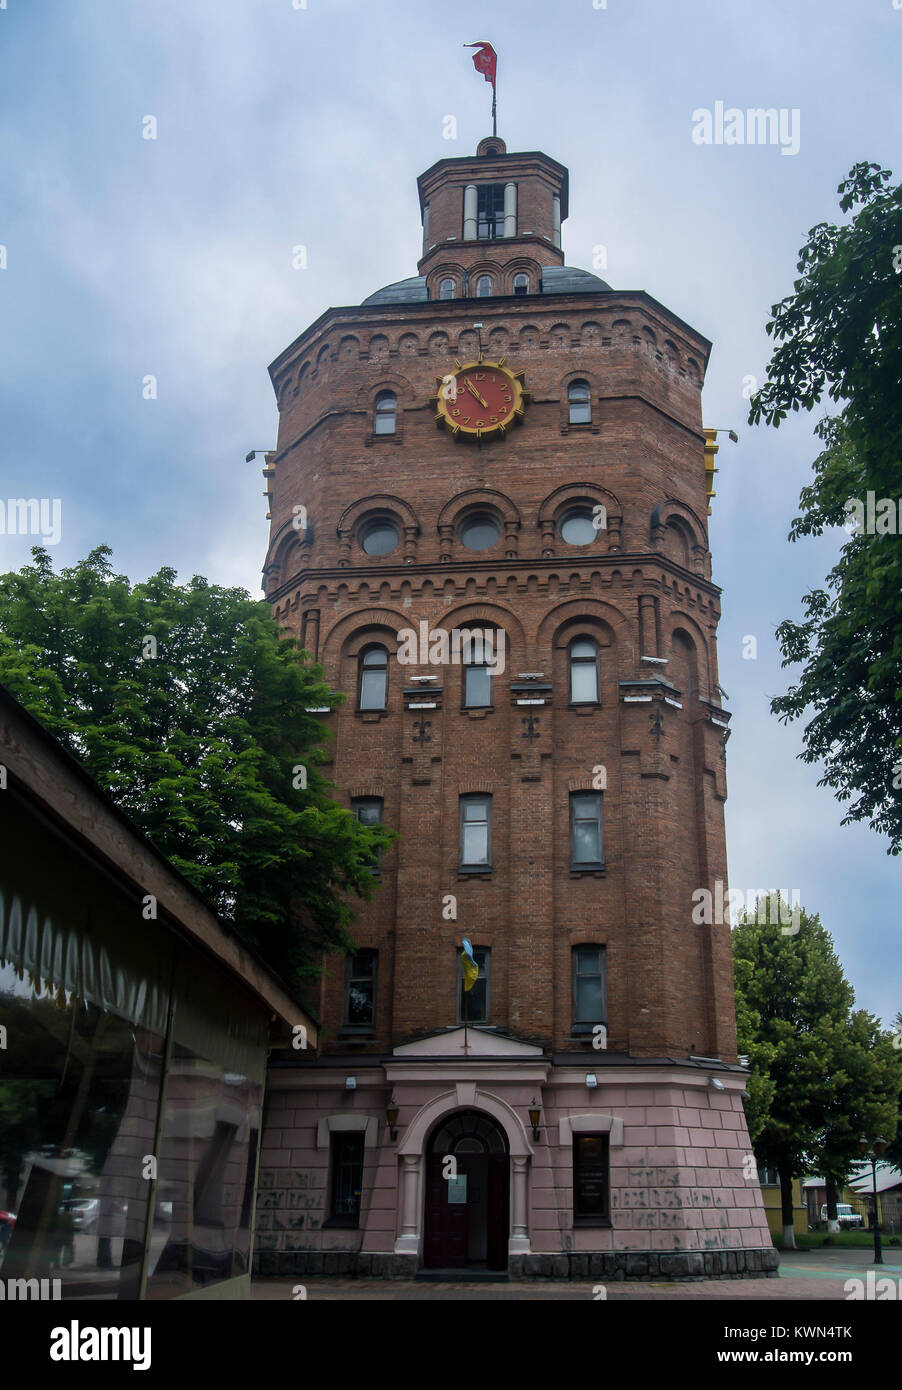 VINNYTSIA, UKRAINE - JUNE 14, 2016:  Exterior view of water tower in European Square - now a Museum Stock Photo